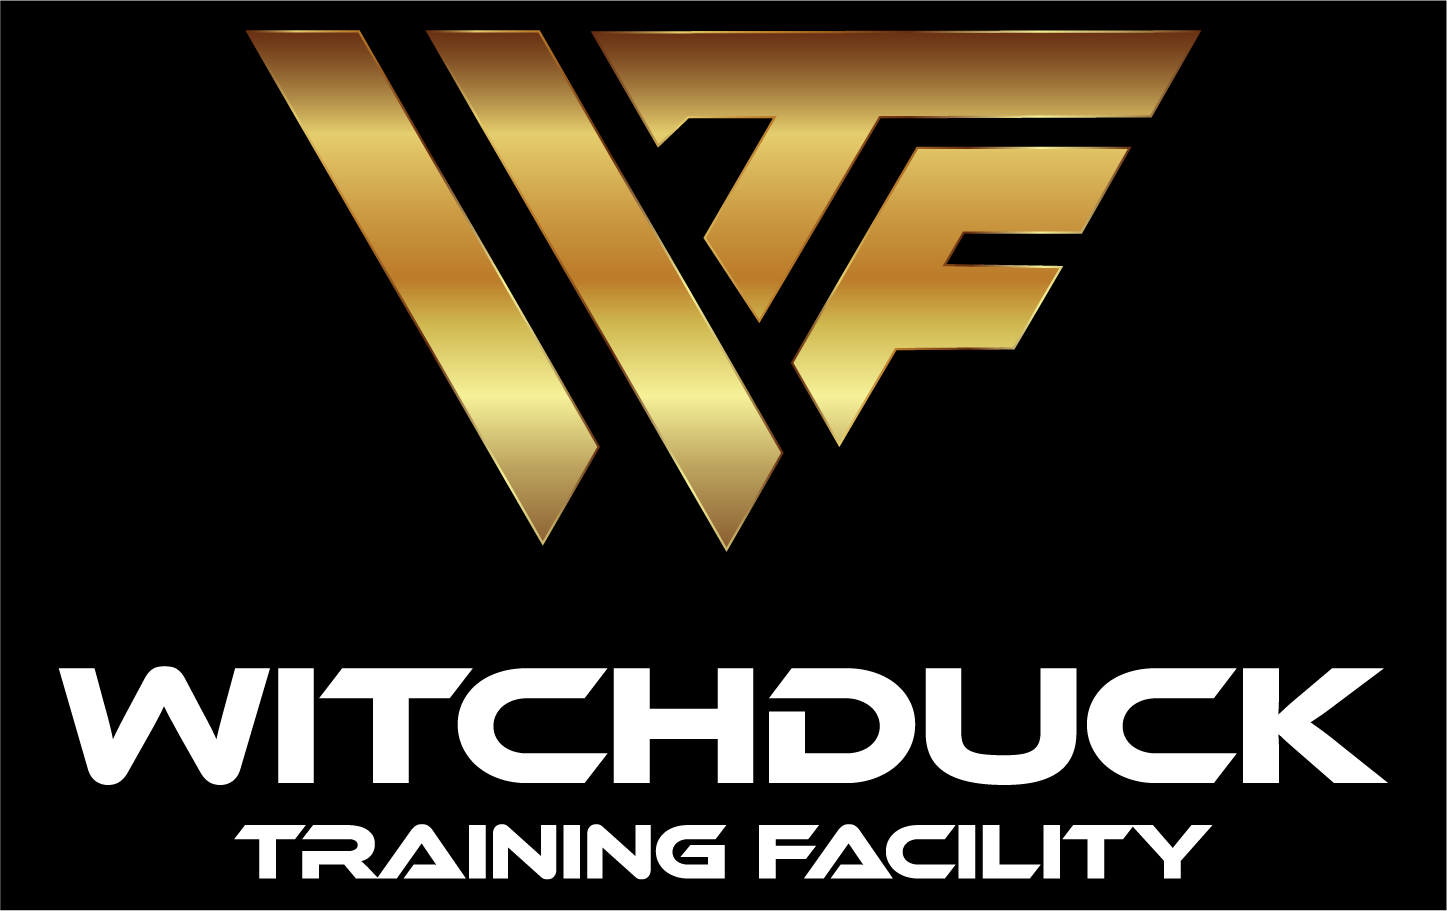 Witchduck Training Facility